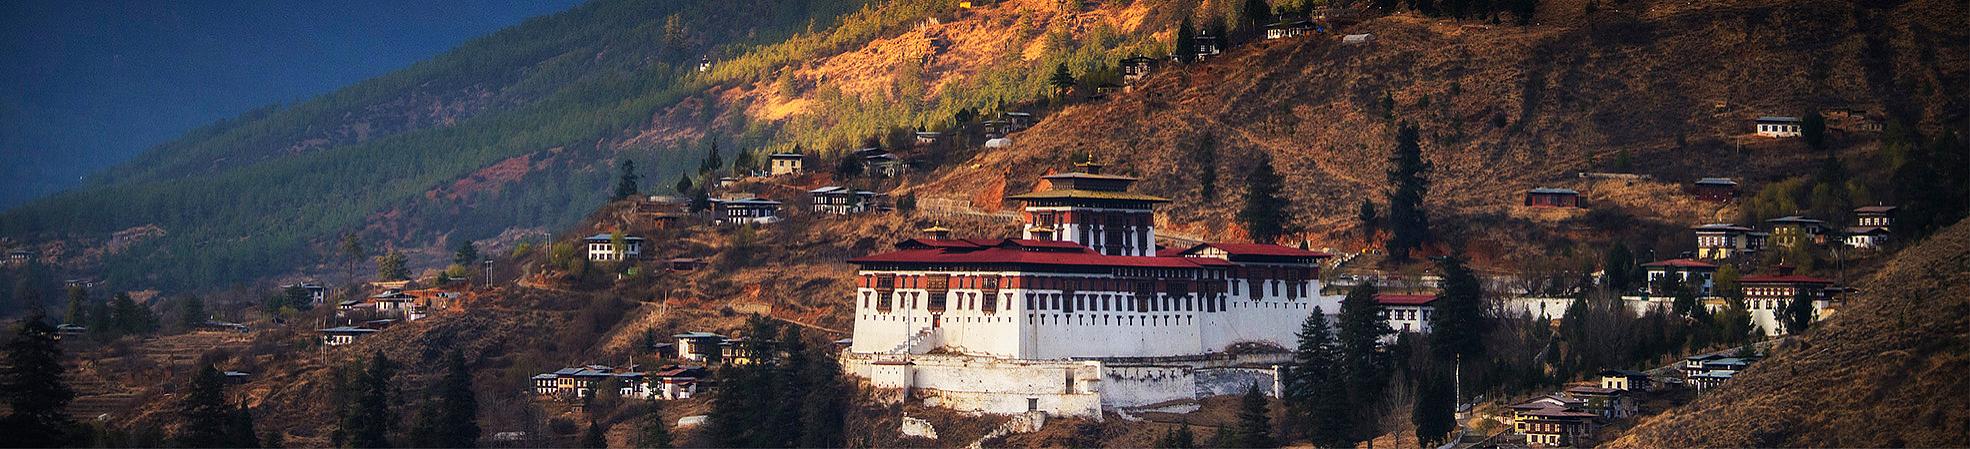 10 Reasons Bhutan Should Be on Your Travel List